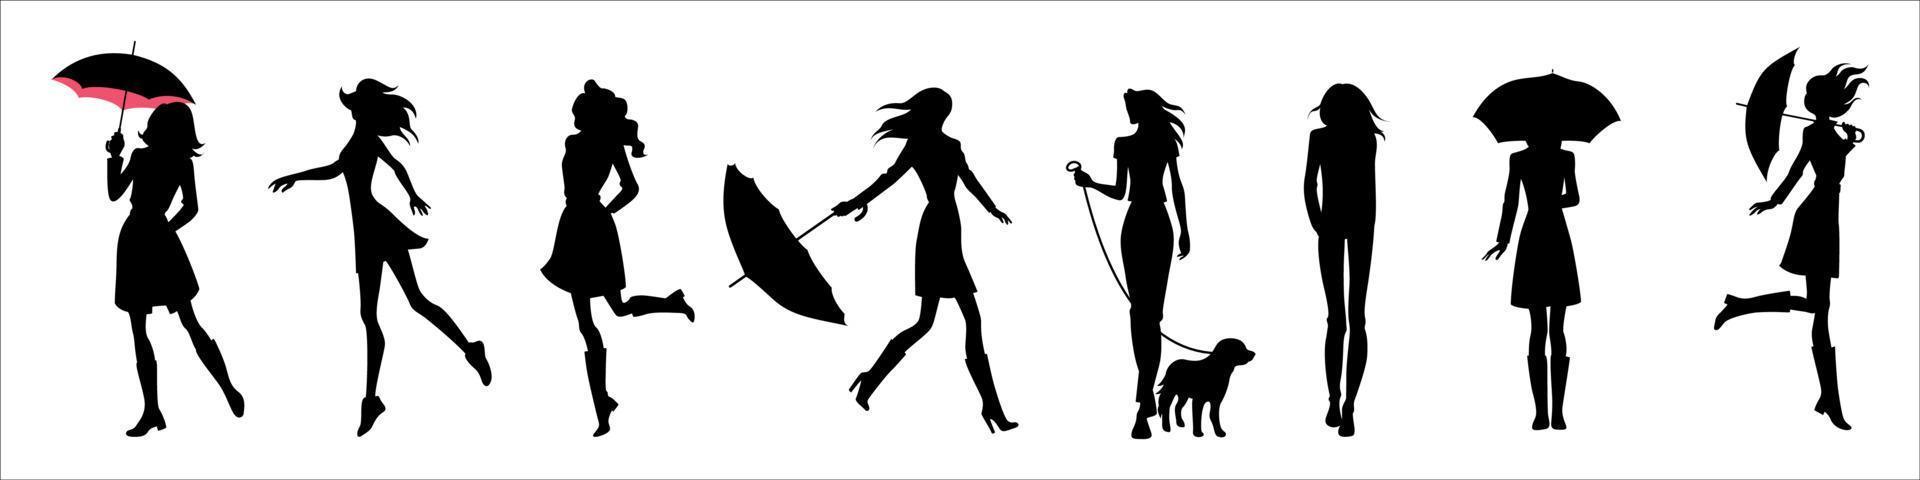 beautiful woman silhouettes vector